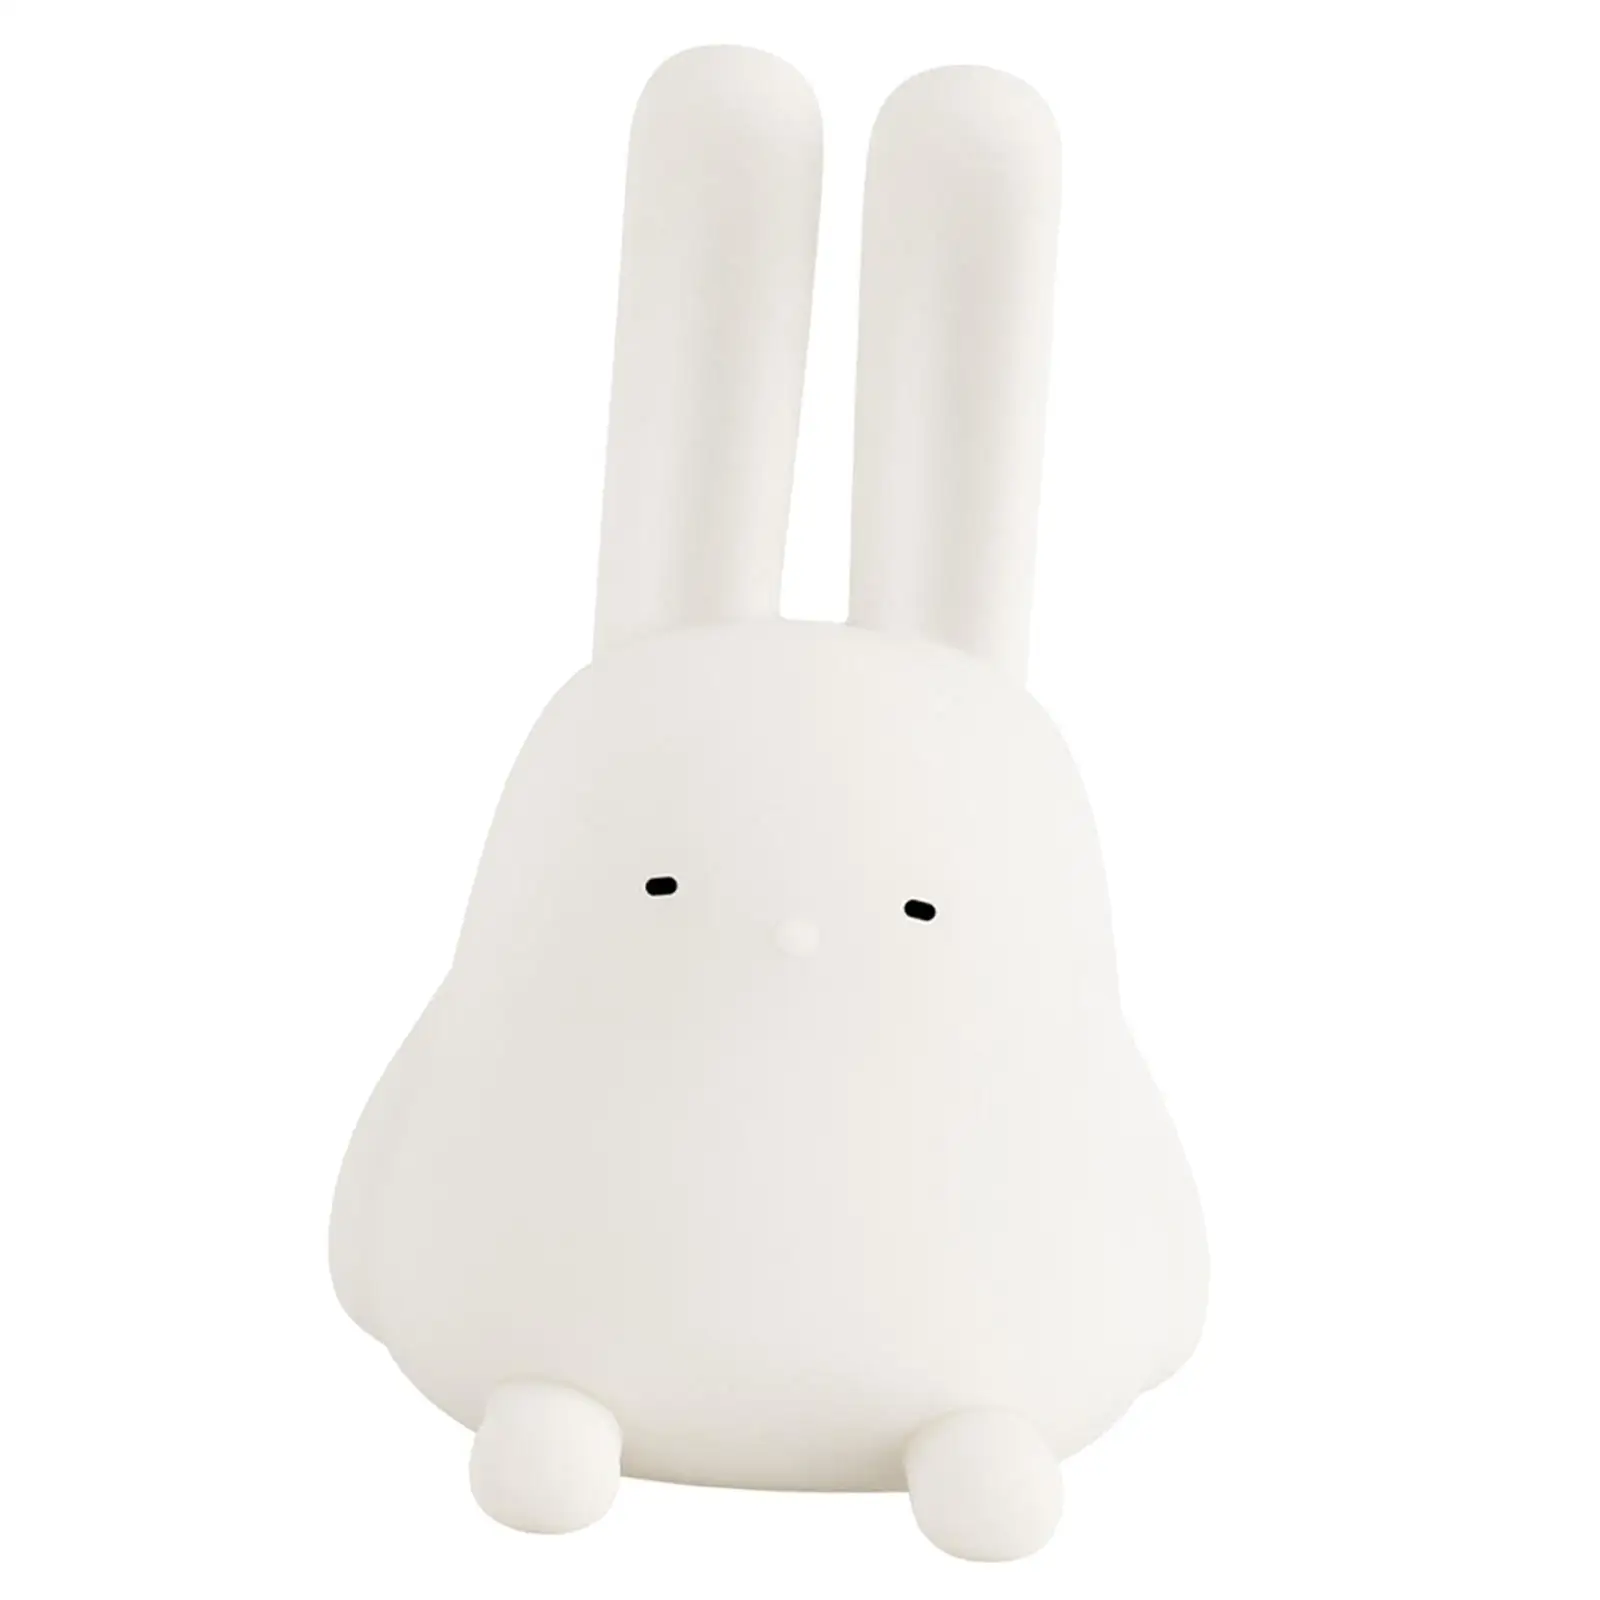 Rabbit Shape Silicone Night Light Lamp Phone Holder Children Gift 15/30 Minute Timing 2600K Warm White Dimmable LED for Sleeping